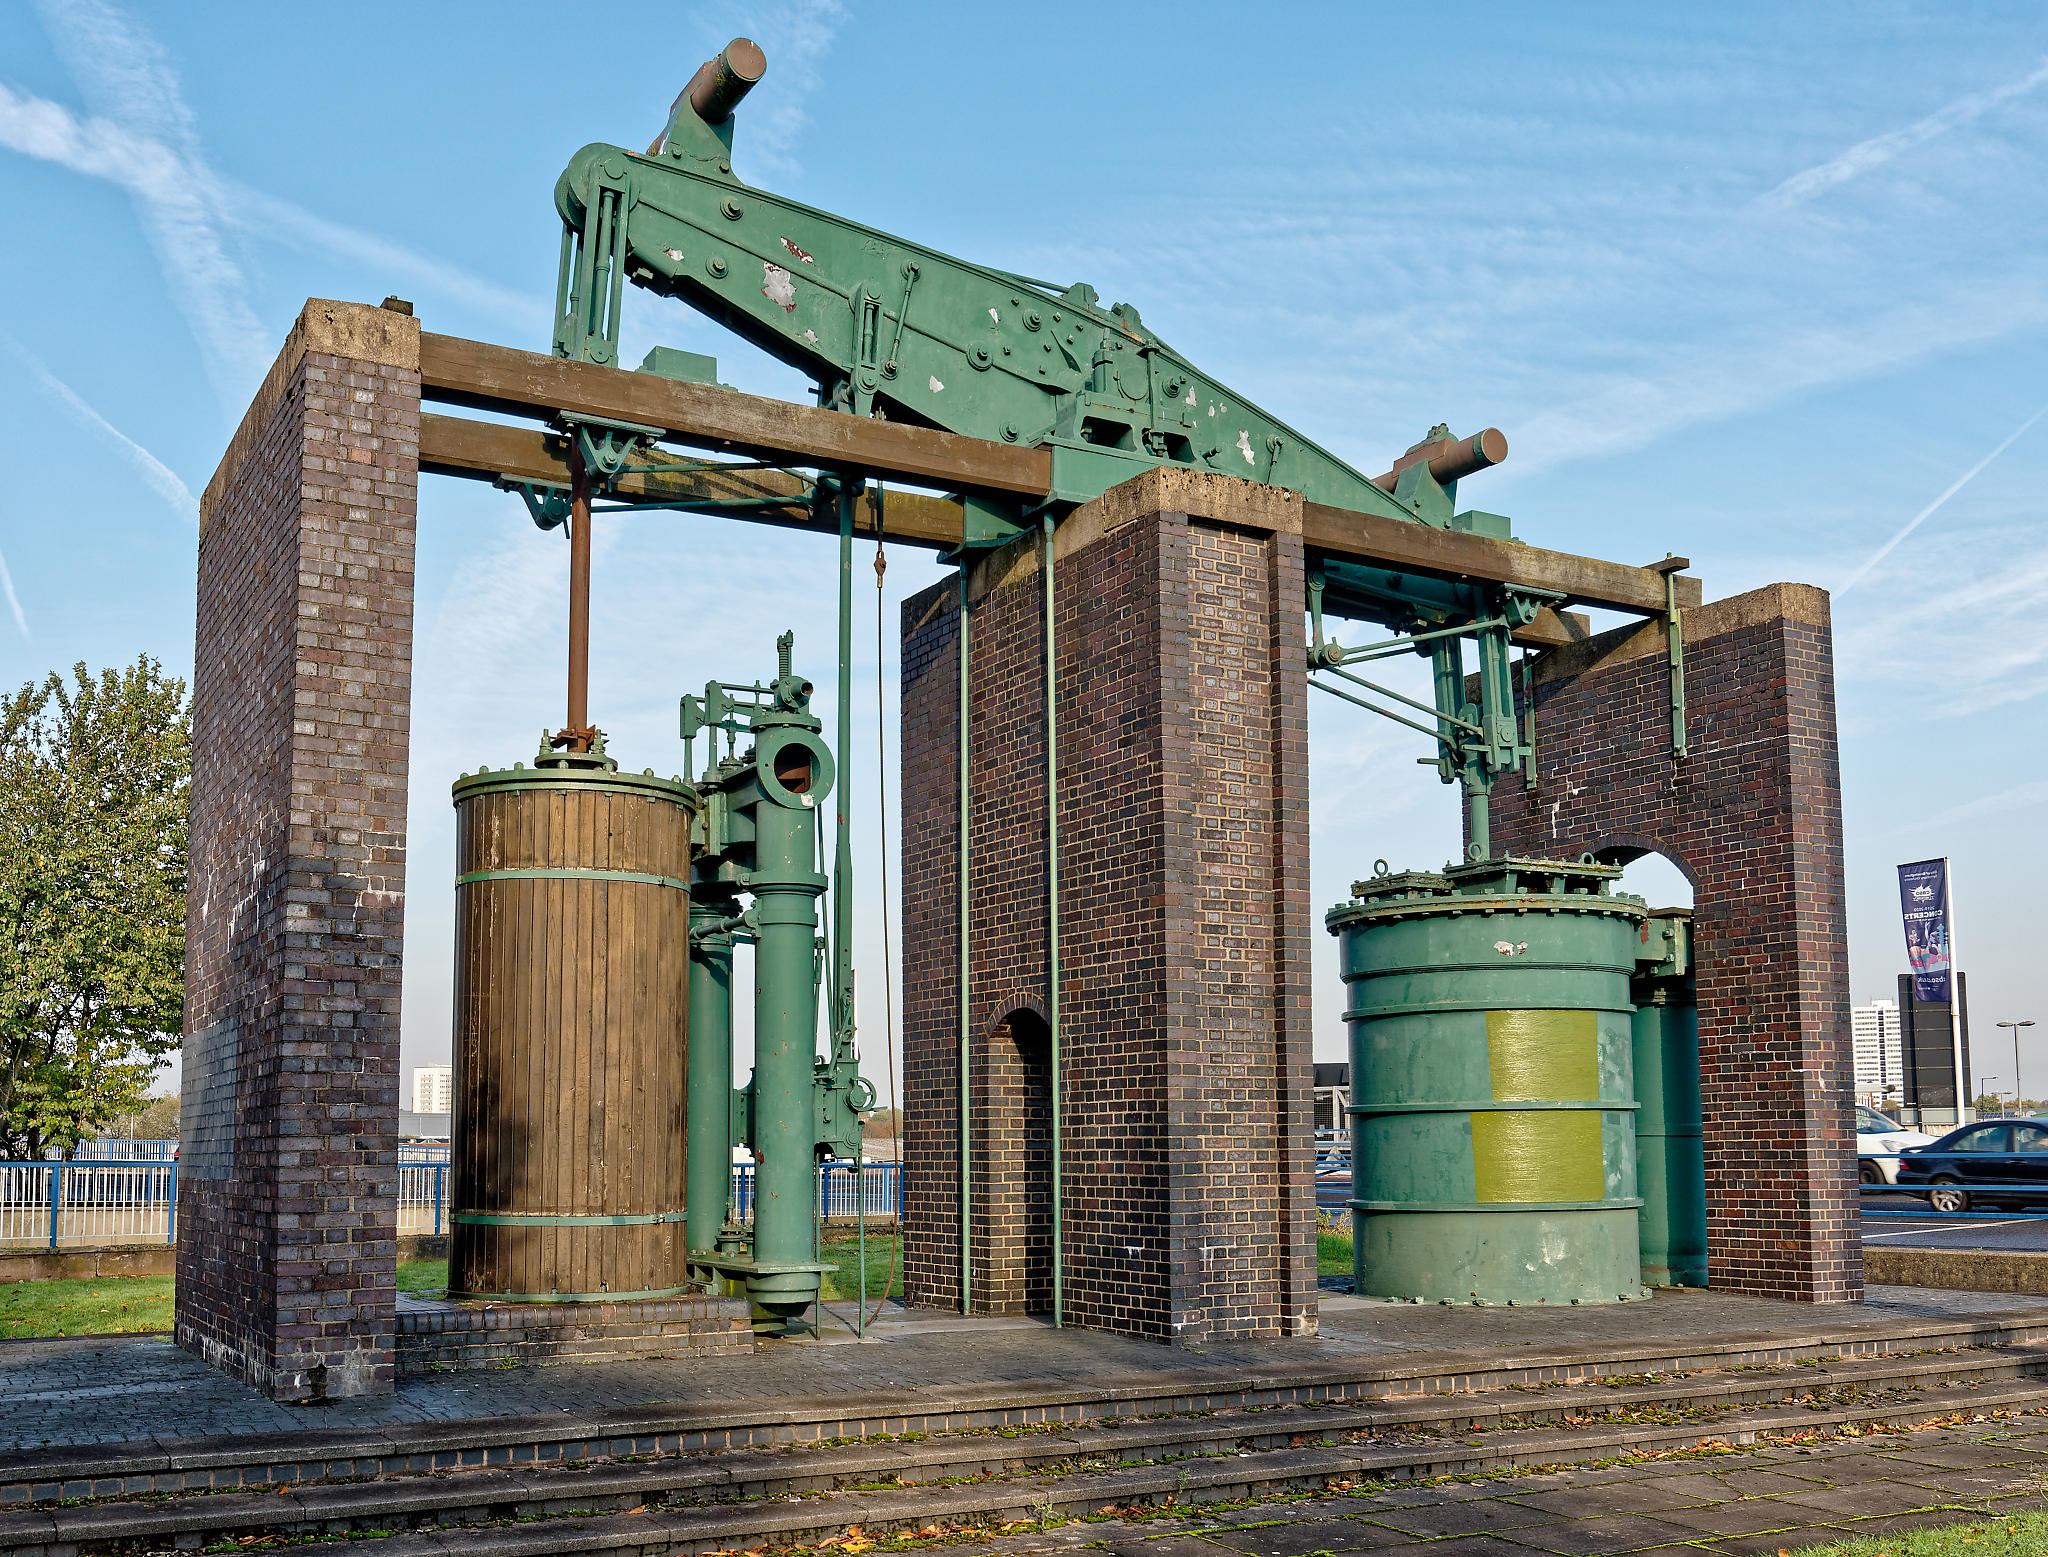 Photograph of the Grazebrook blowing engine built in 1817 against a blue sky. A red brick structure of three supporting walls supports a green iron beam on the central wall. On either side of the central wall is a large cylinder. The left hand cylinder is cased in wood, and is 42 inches in diameter. The Right hand cylinder is painted green and is an 84 inch air pump.